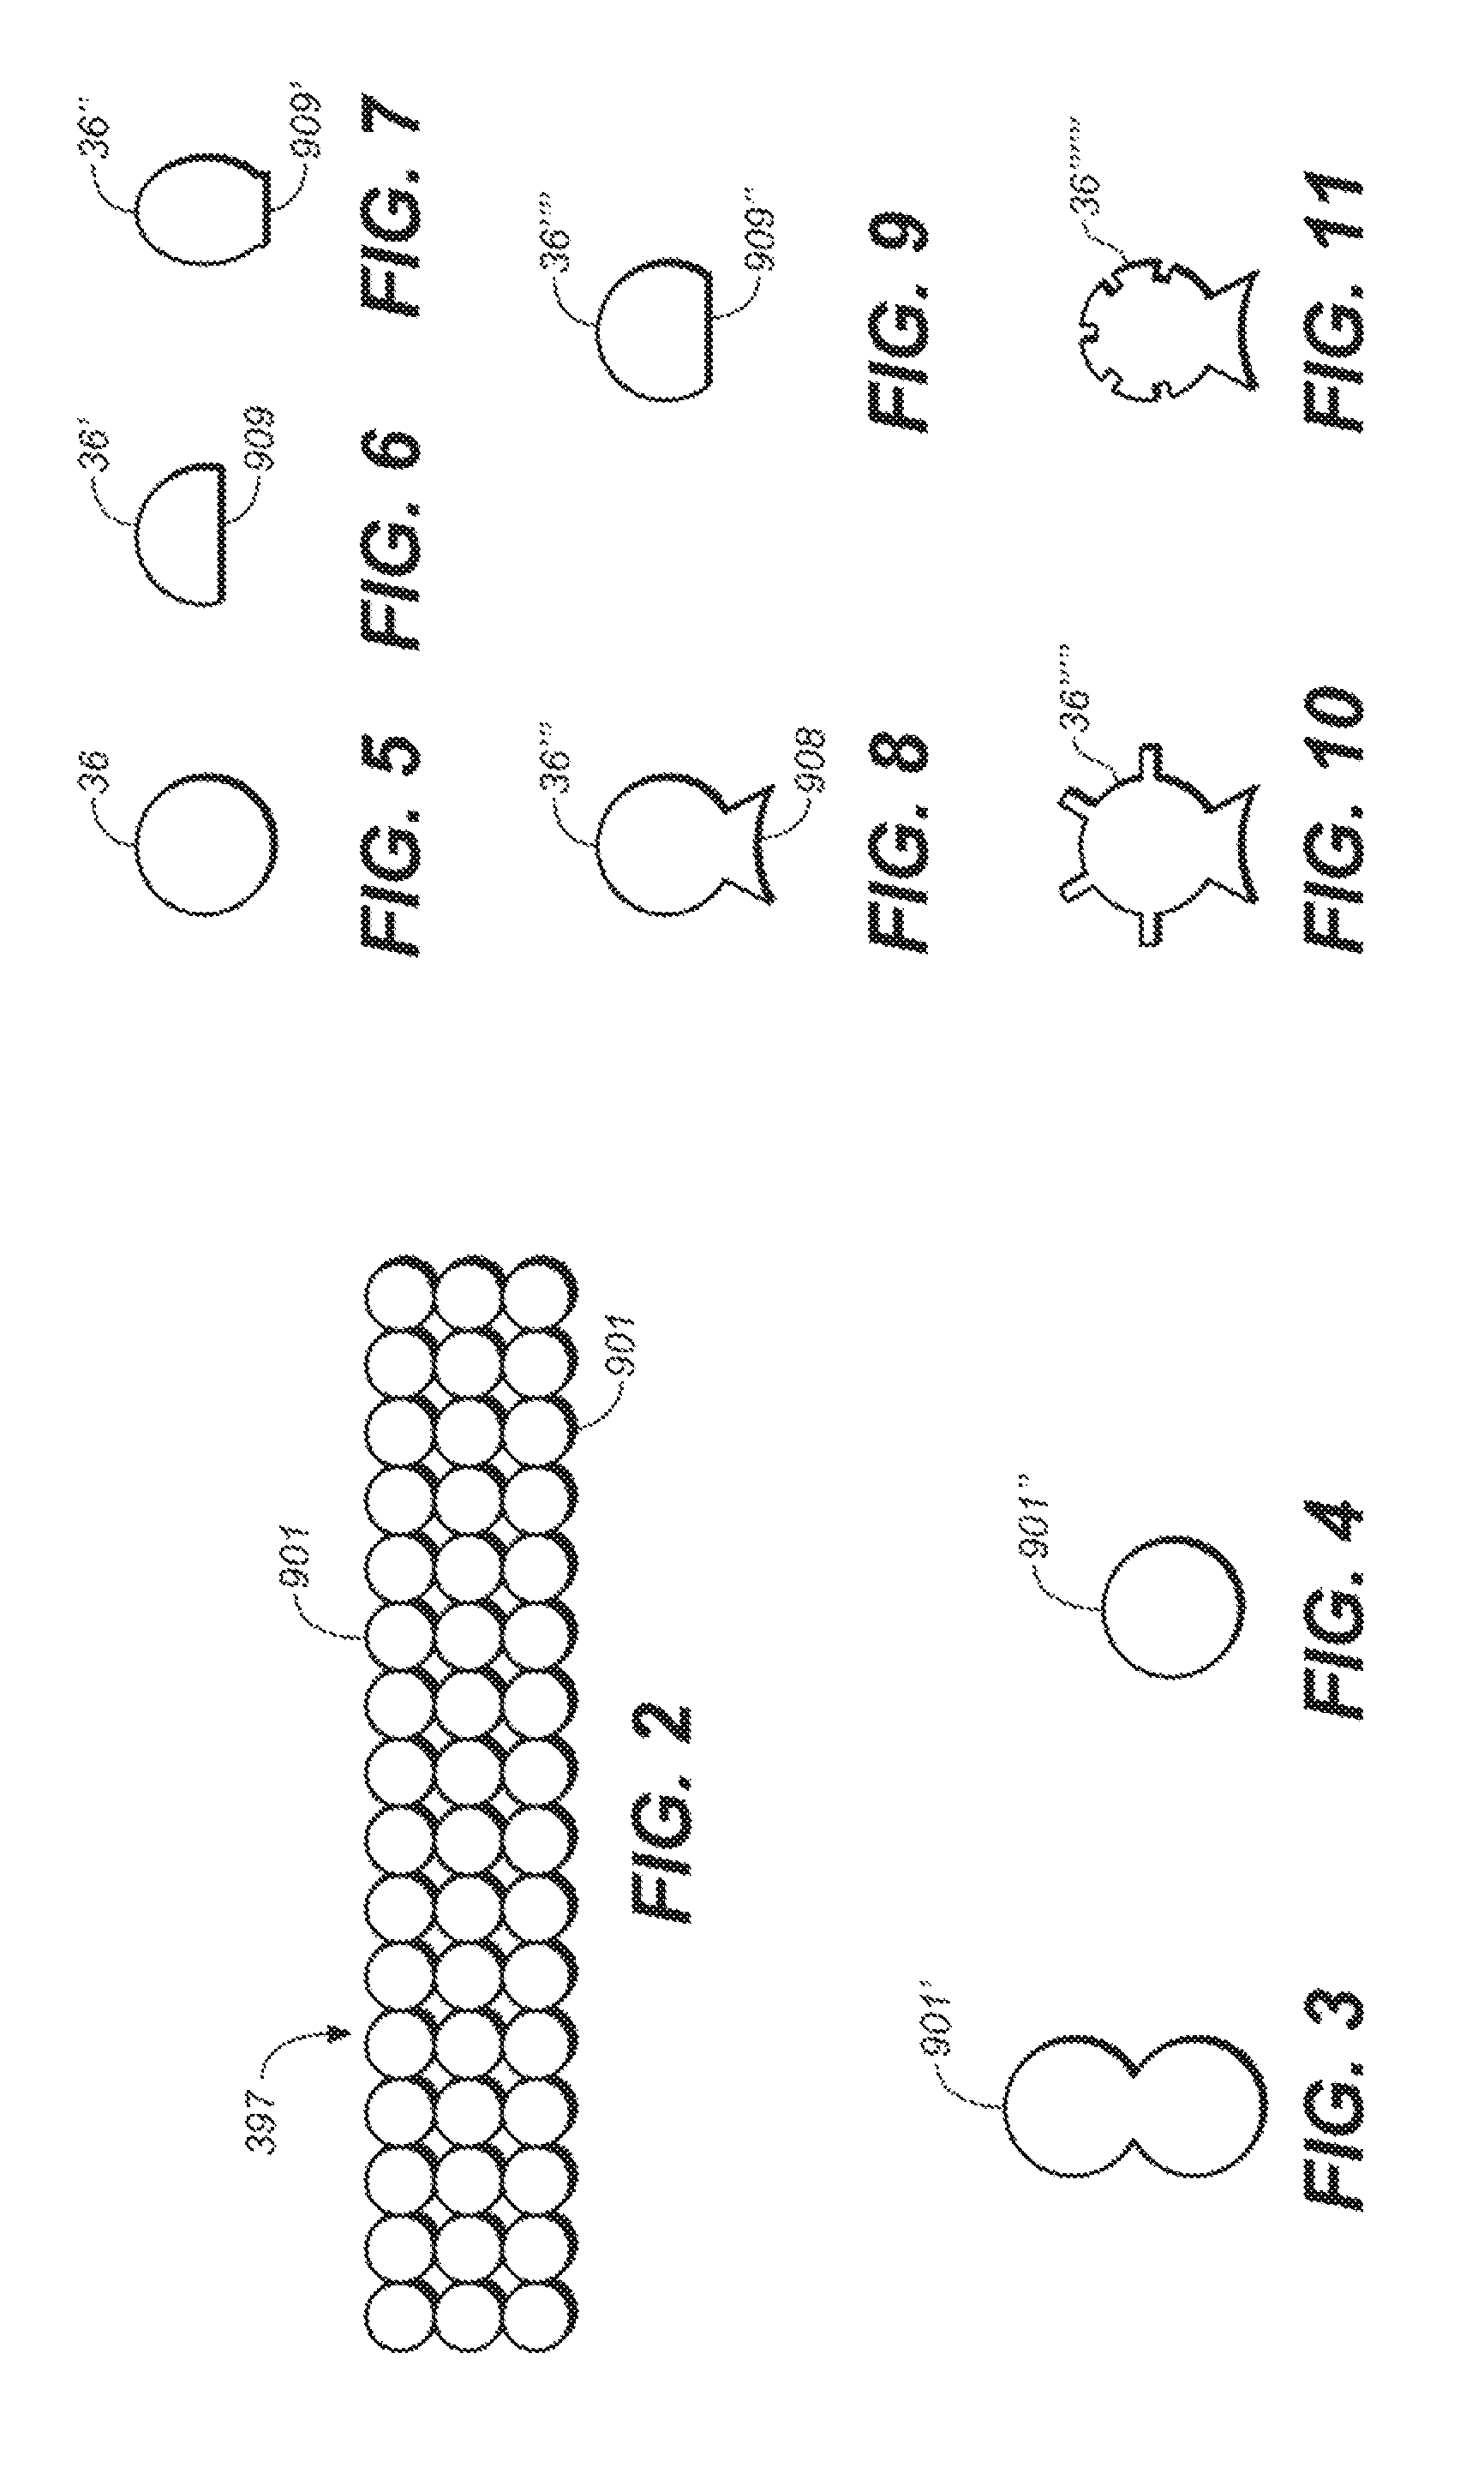 Method for forming a high strength synthetic rope